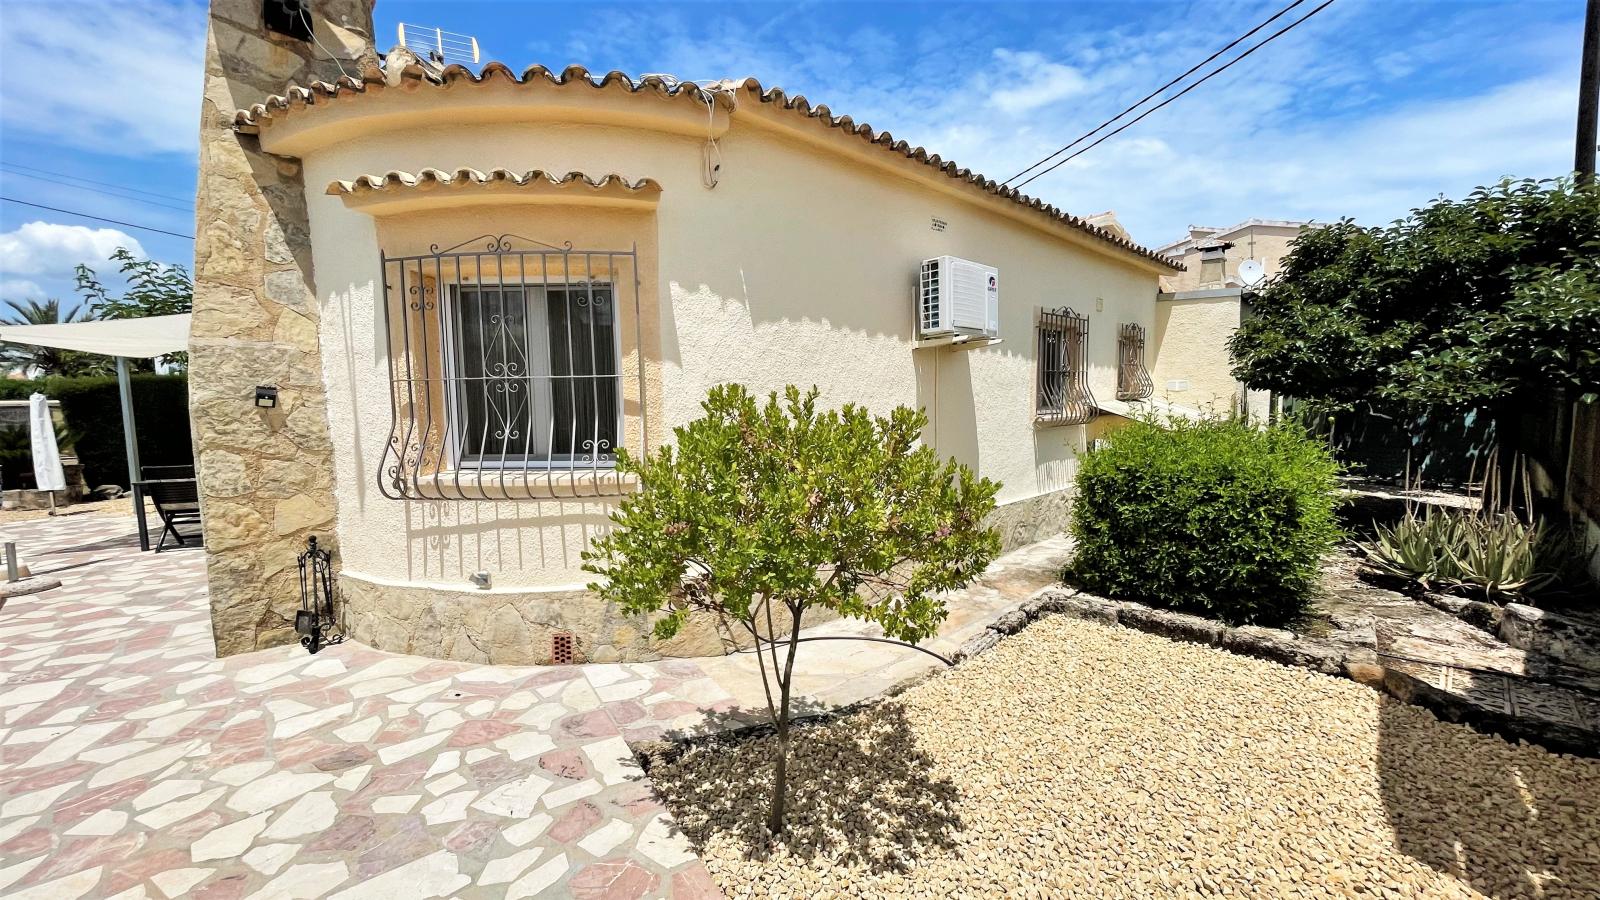 Lovely villa in Els Poblets, with pool, central heating, air conditioning , conservatory and much more!